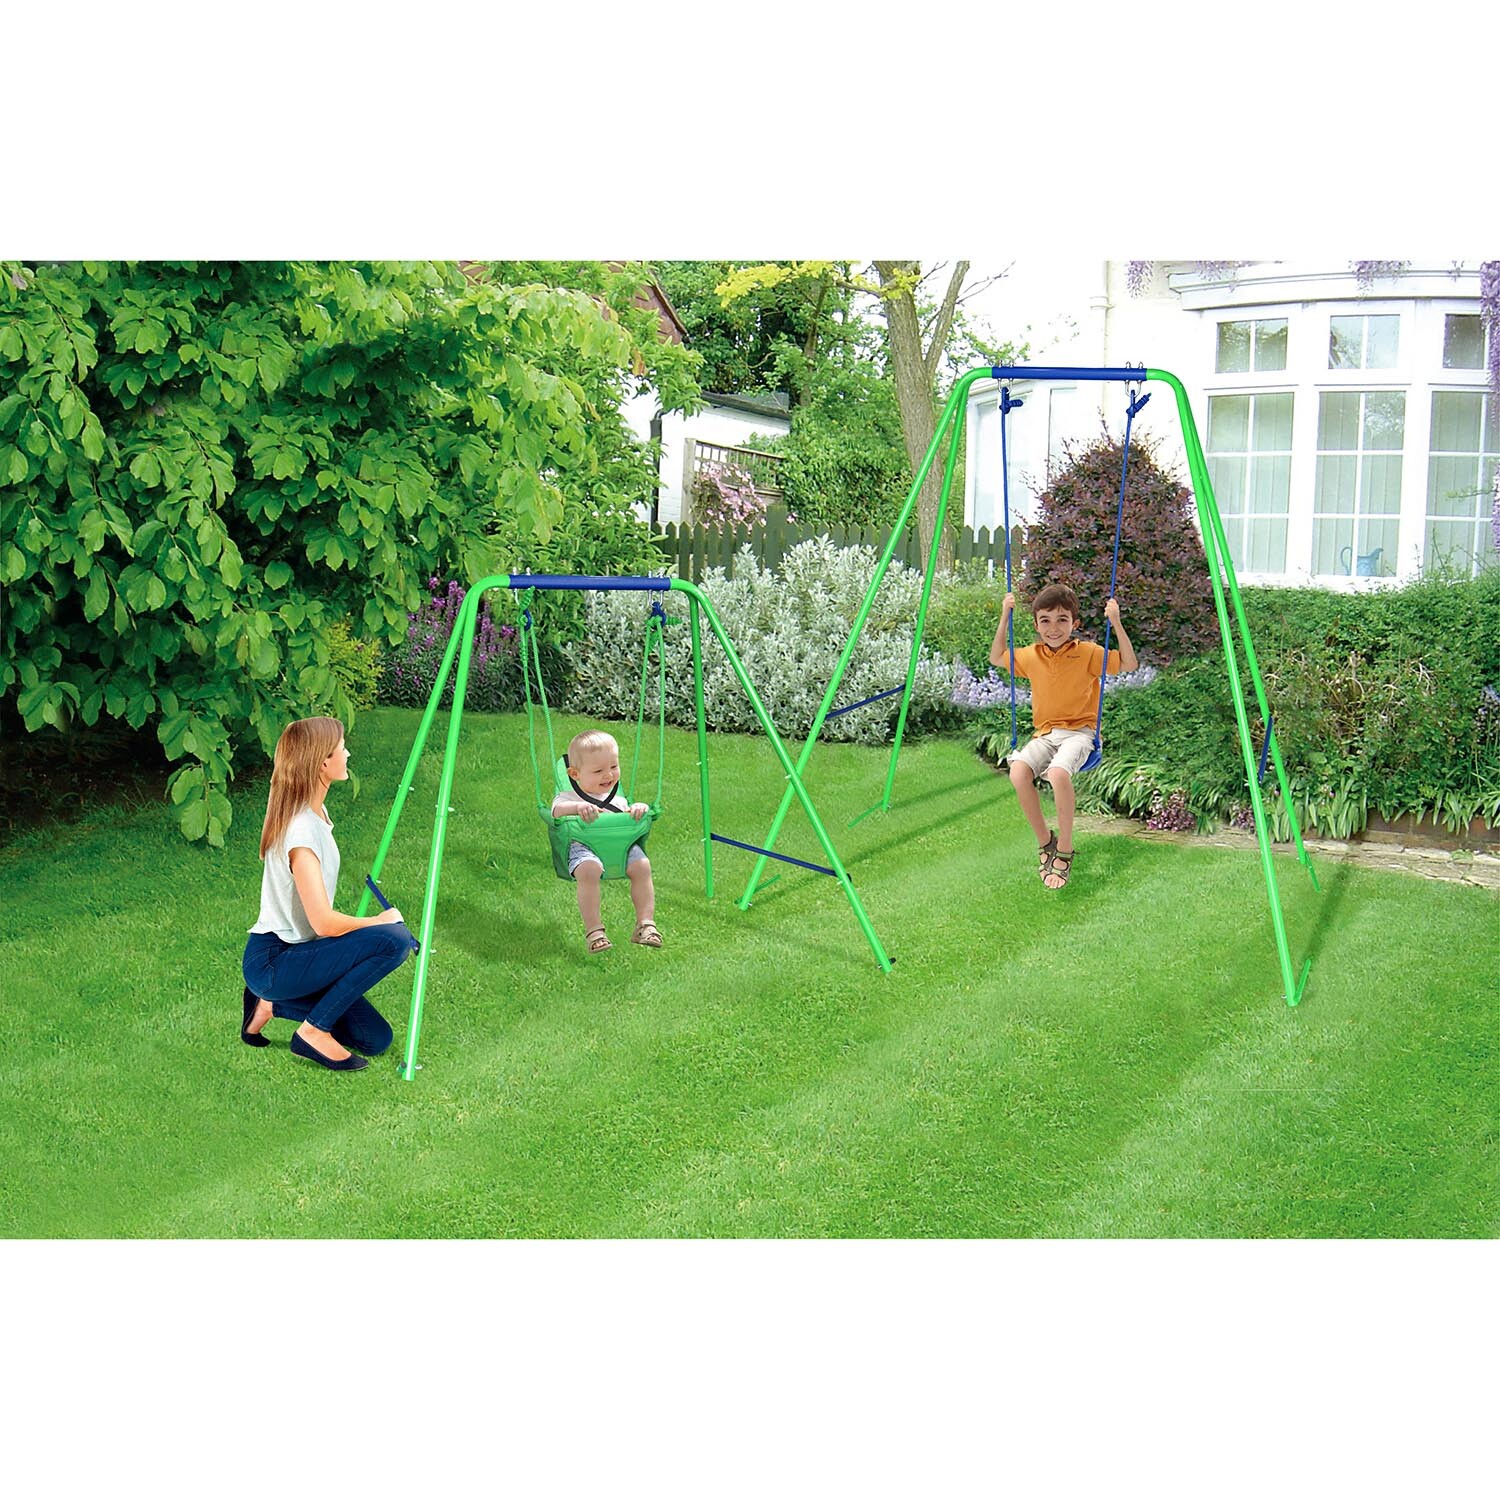 2-in-1 Convertible Swing Image 2